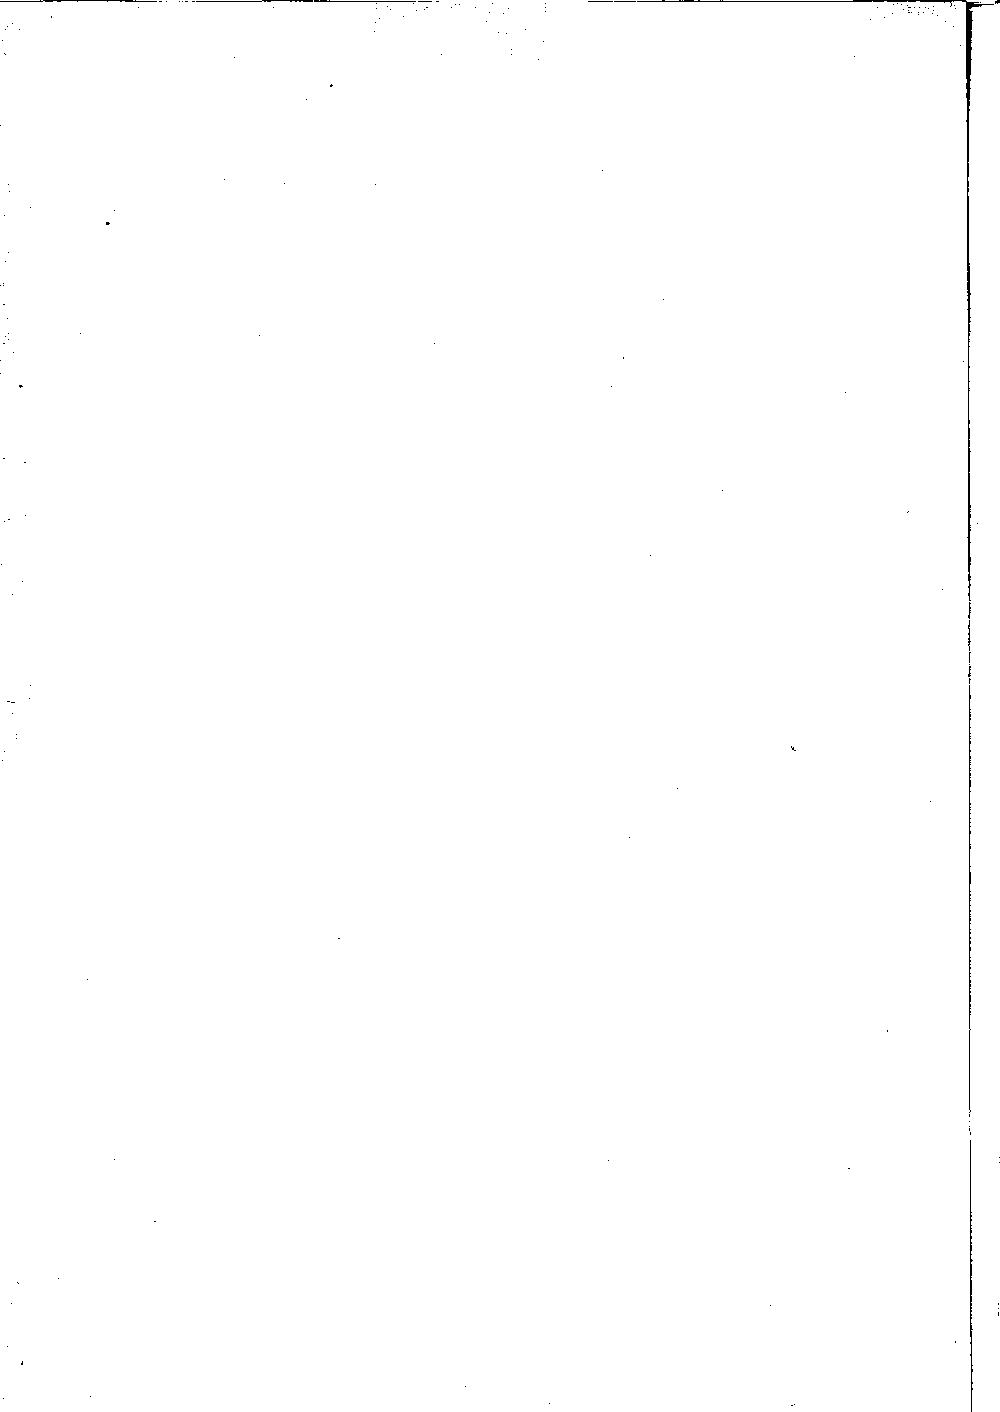 Scan of page VI